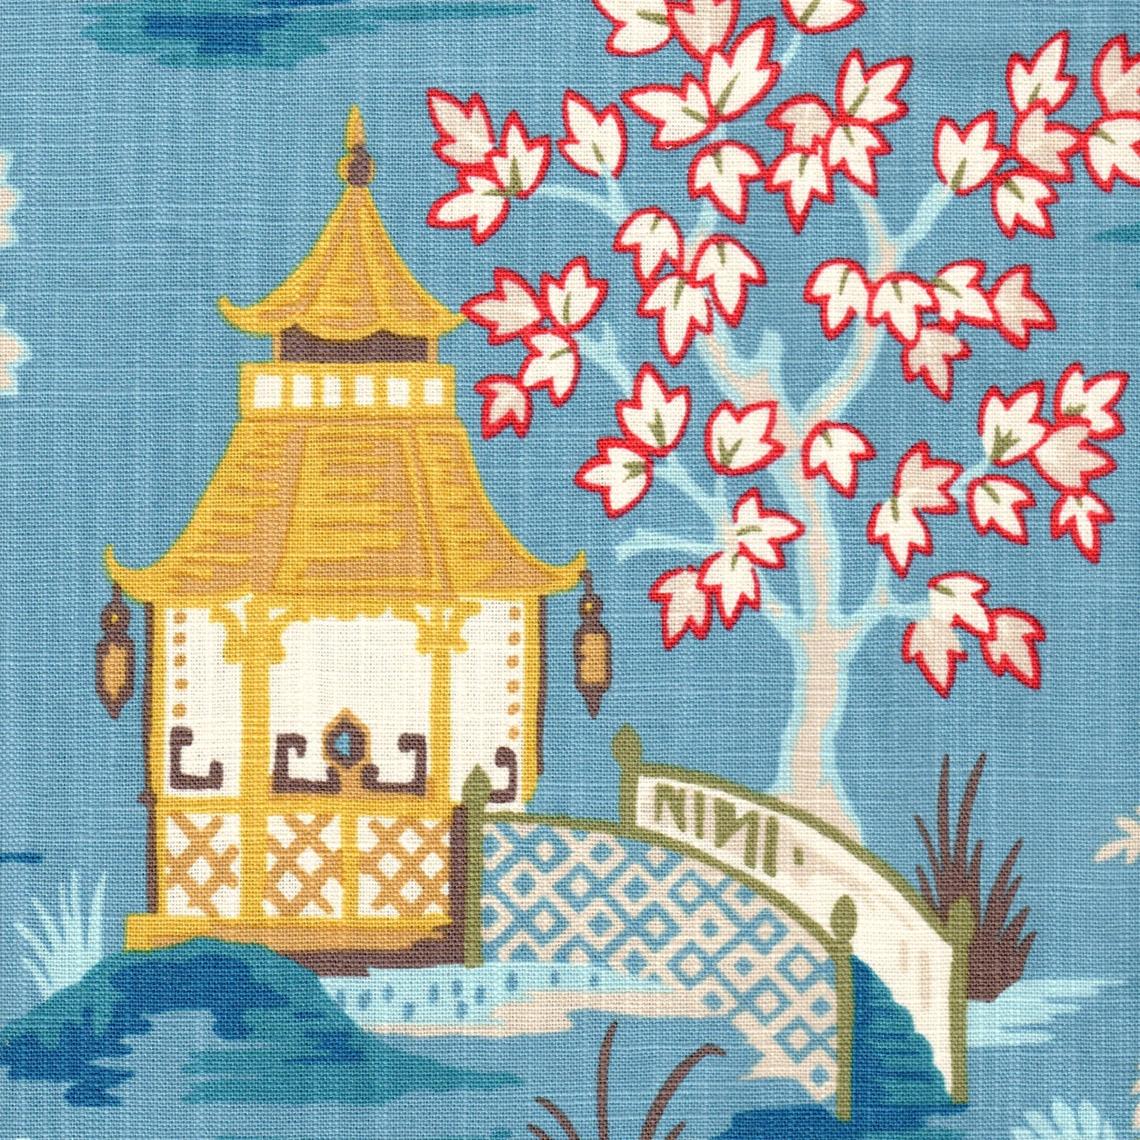 tailored tier cafe curtain panels pair in shoji azure blue oriental toile multicolor chinoiserie